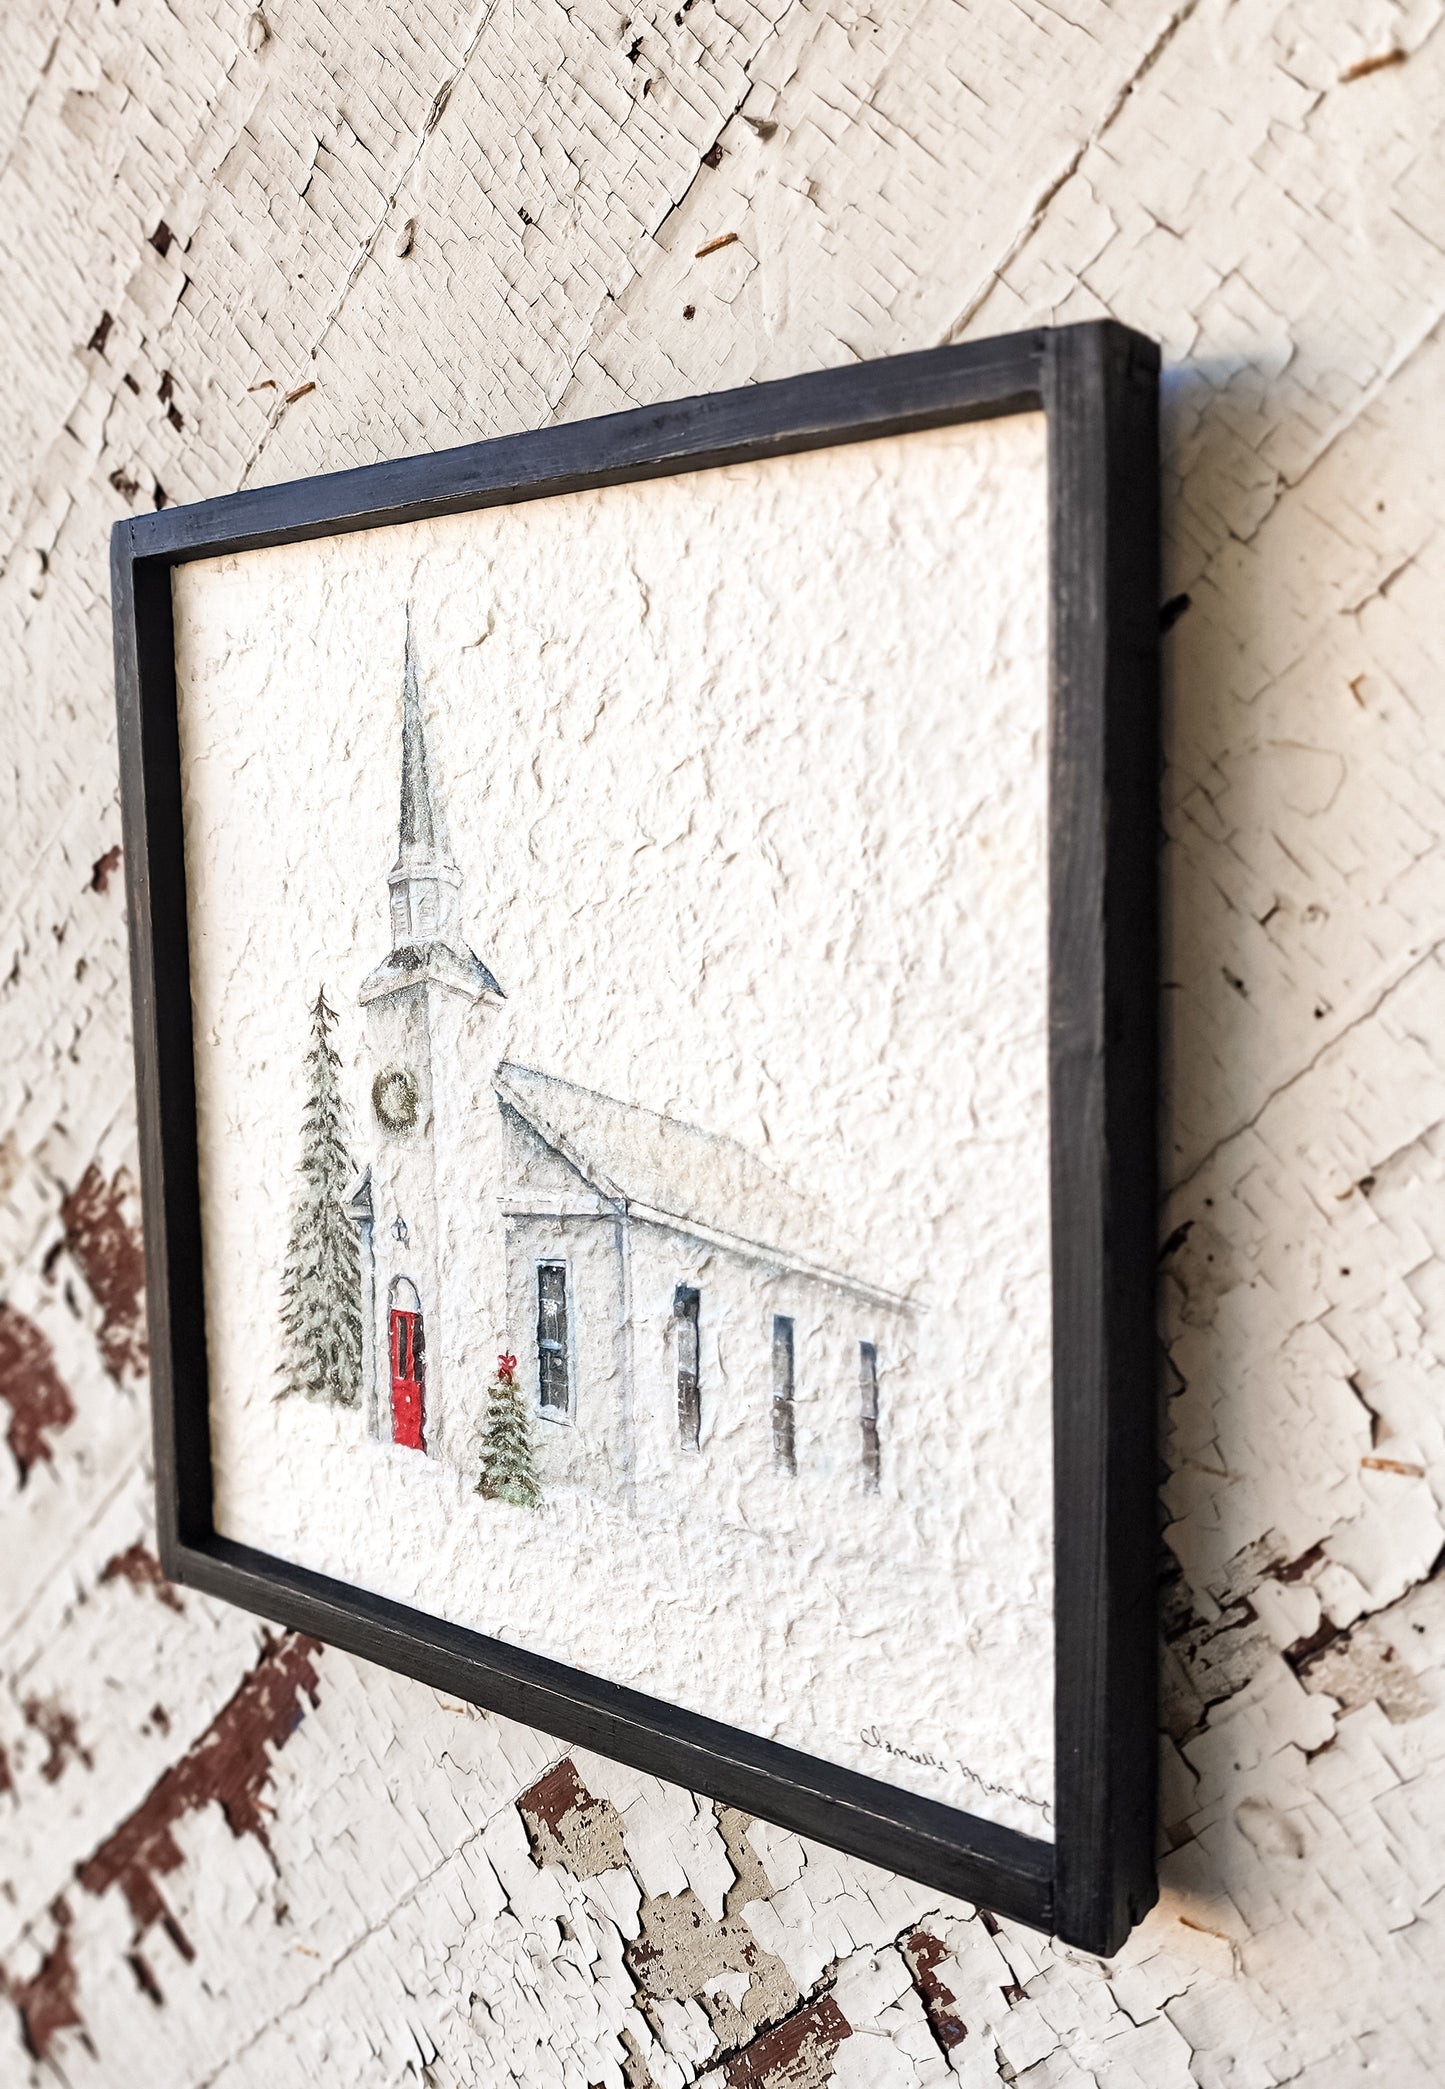 Framed Church on Textured Paper